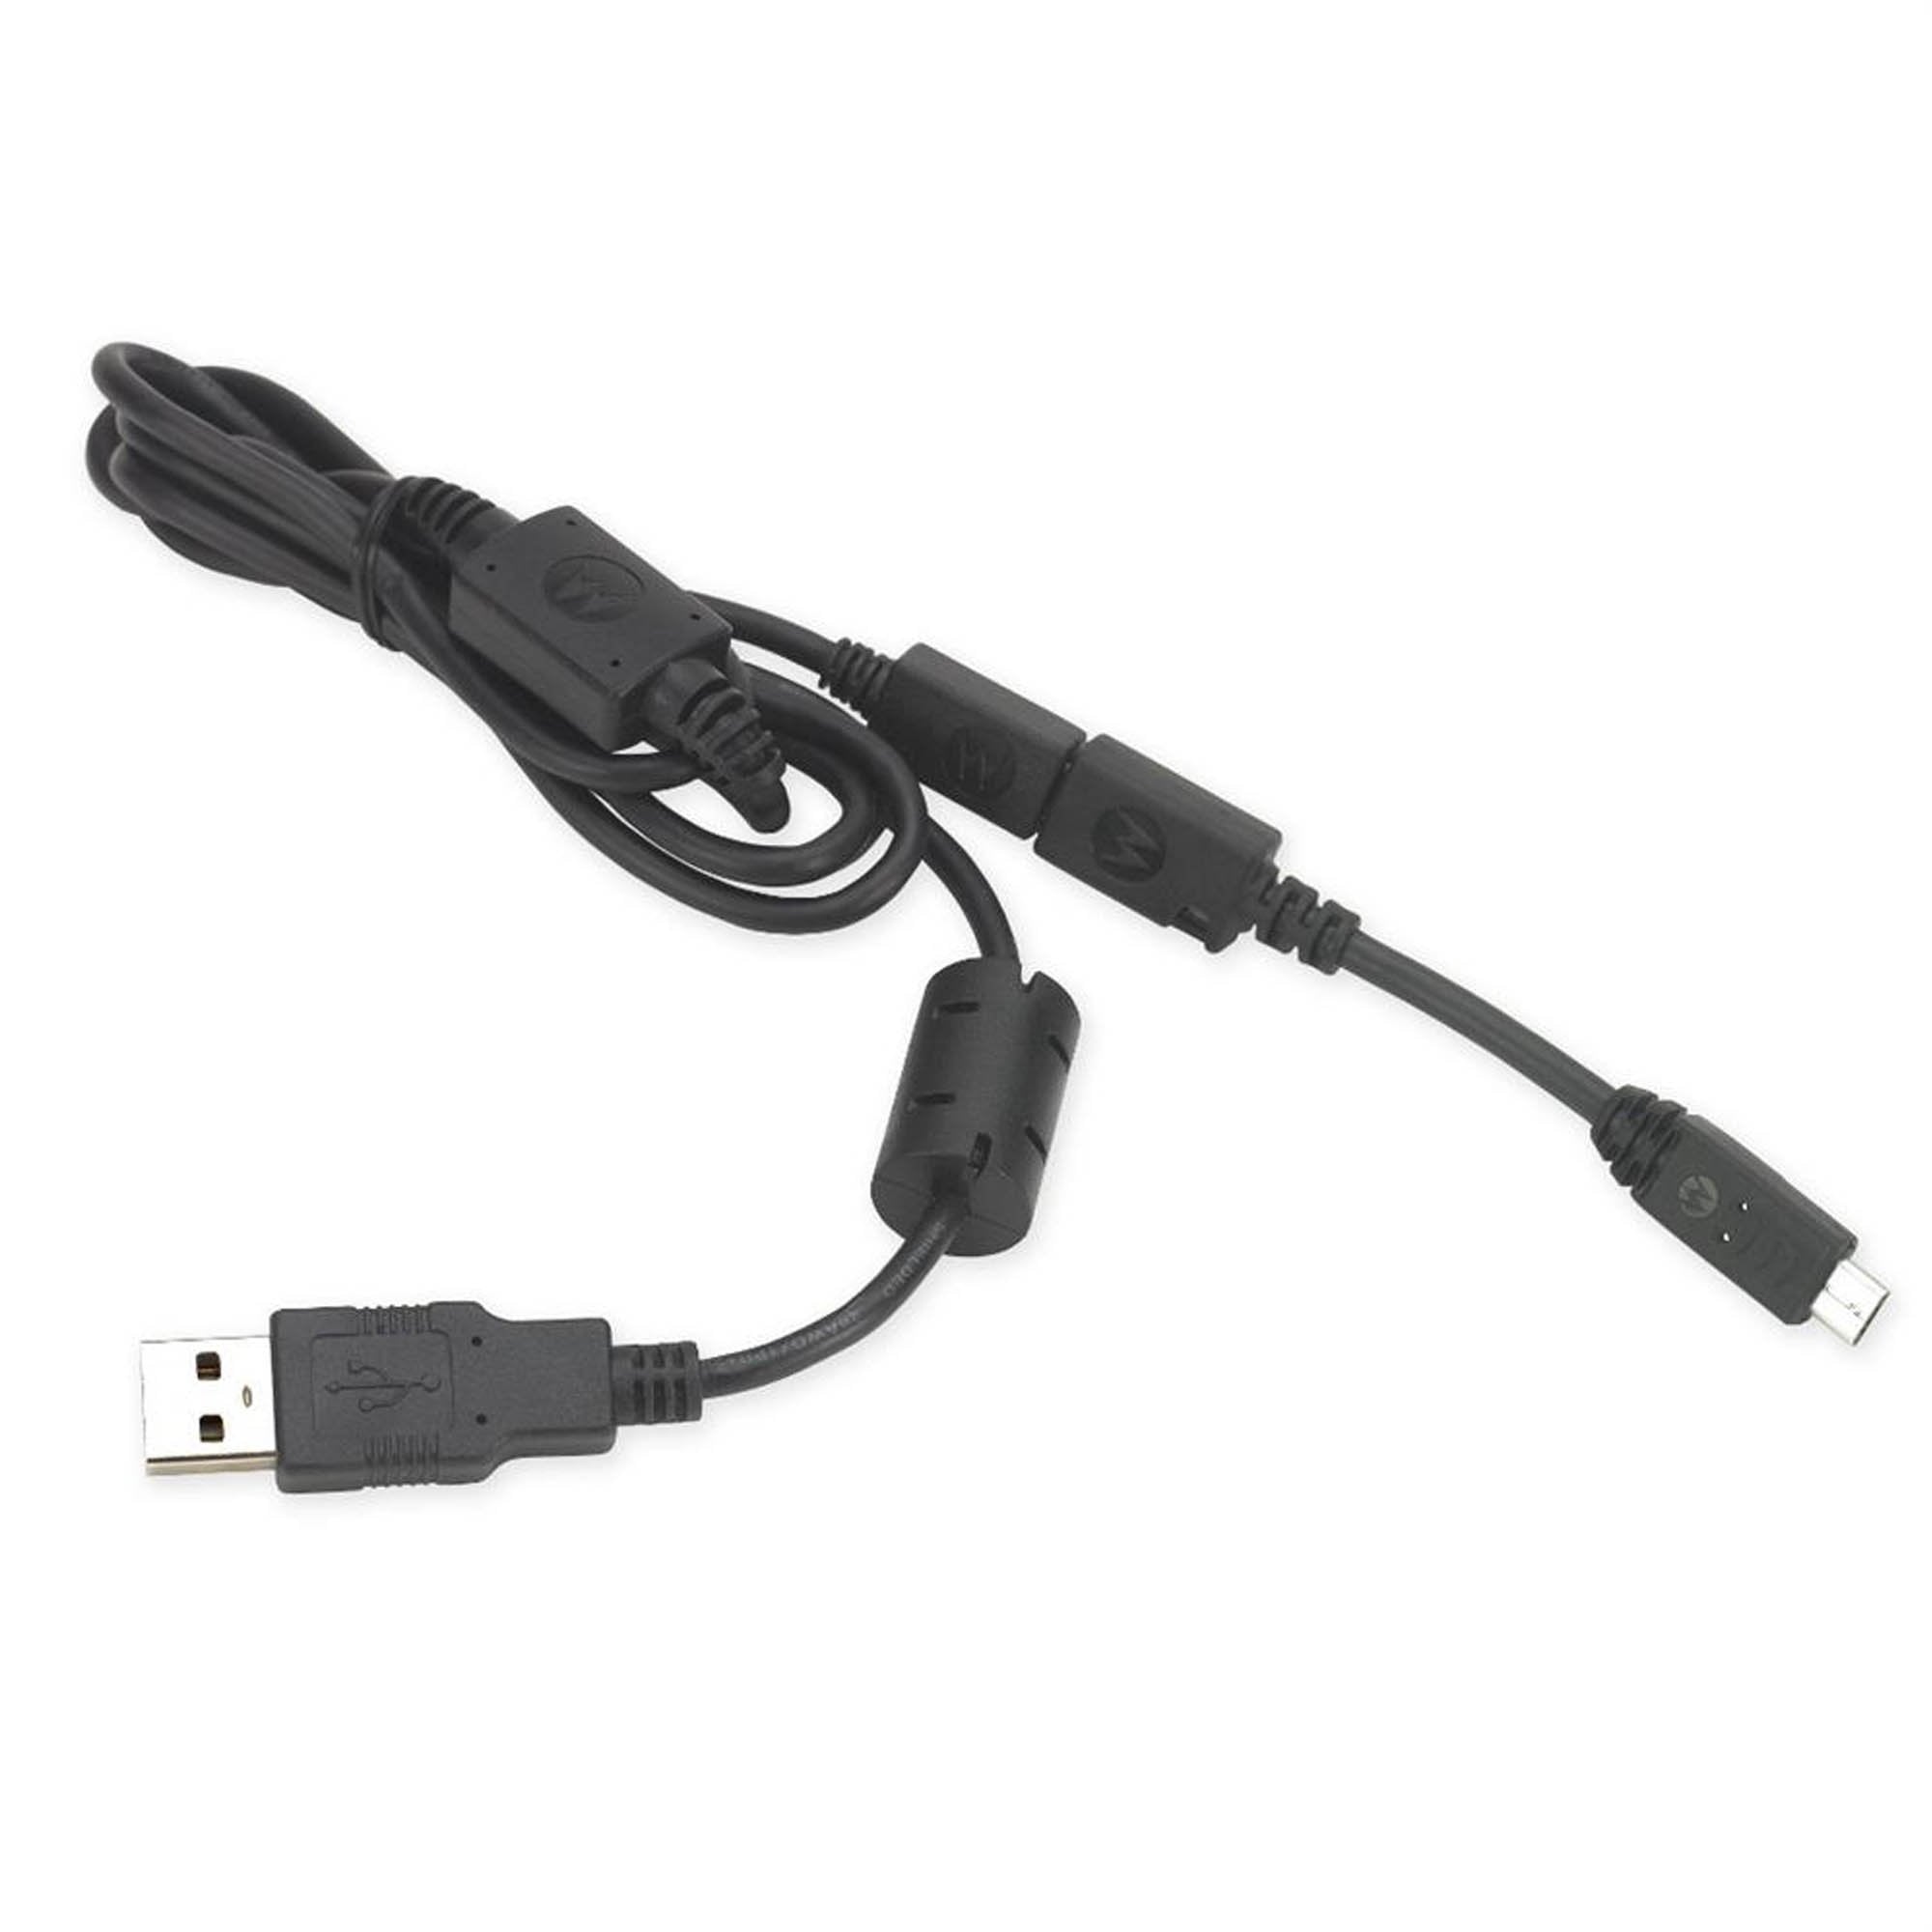 Motorola HKKN4027A Programming Cable for RDX, RM, DTR, DLR, CLS 